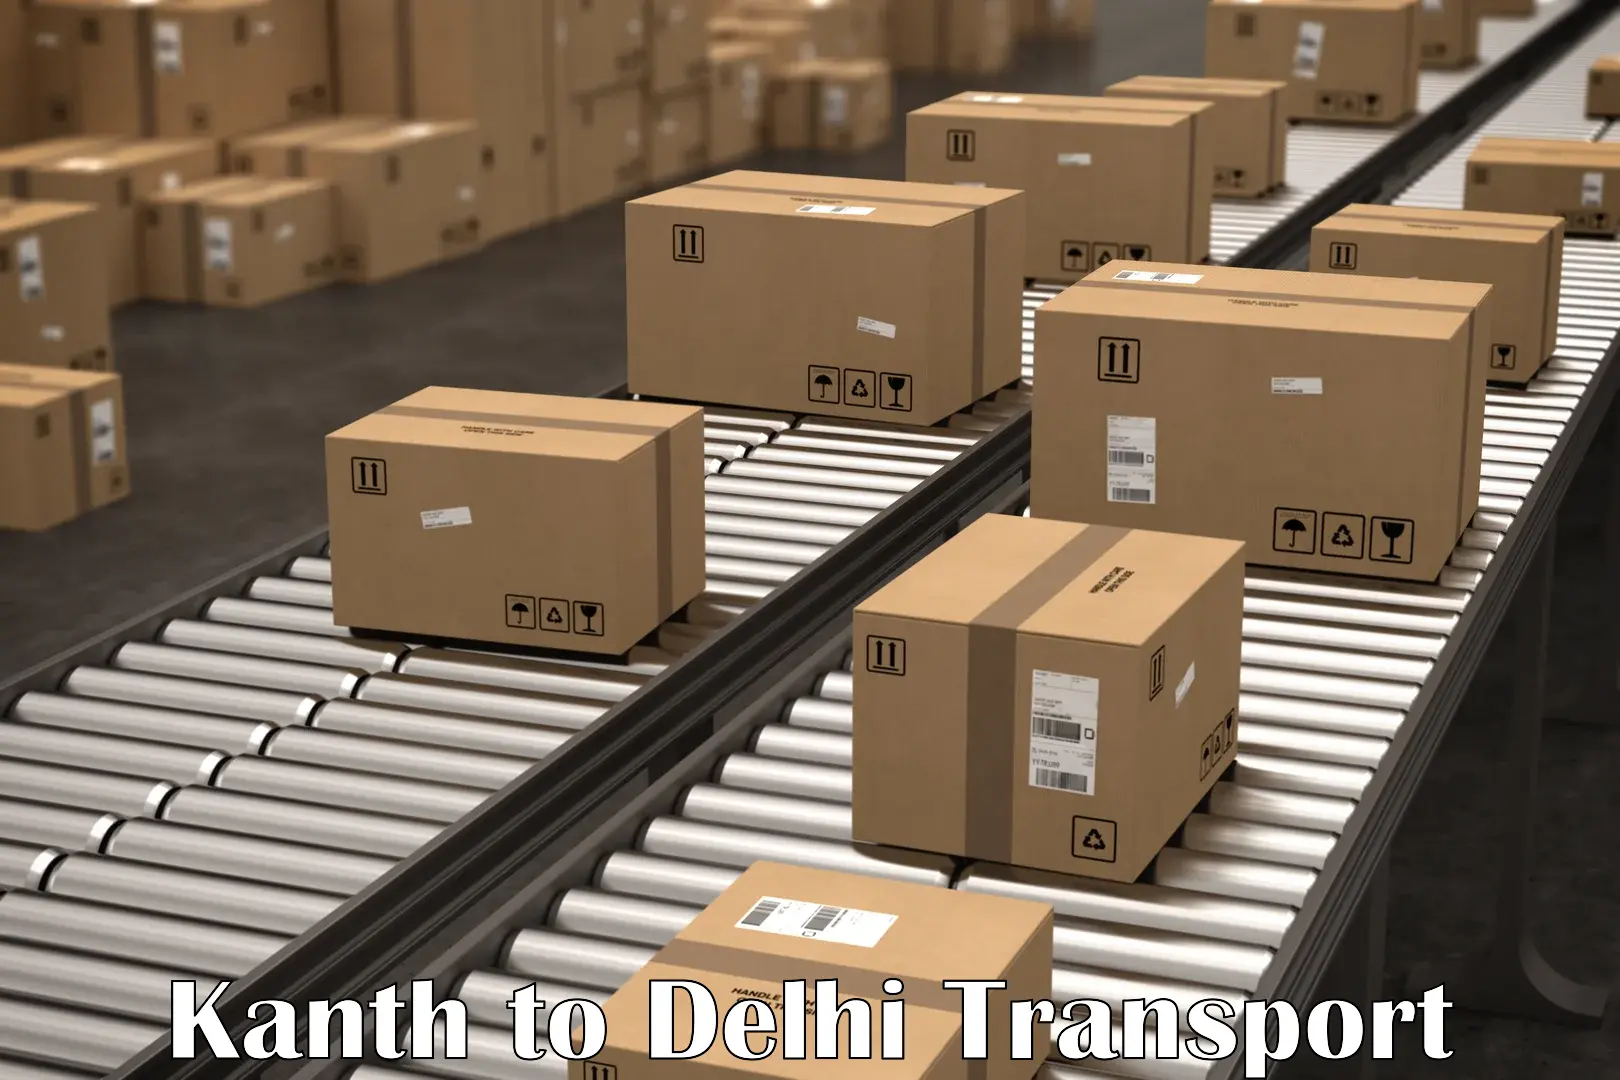 Vehicle transport services in Kanth to University of Delhi